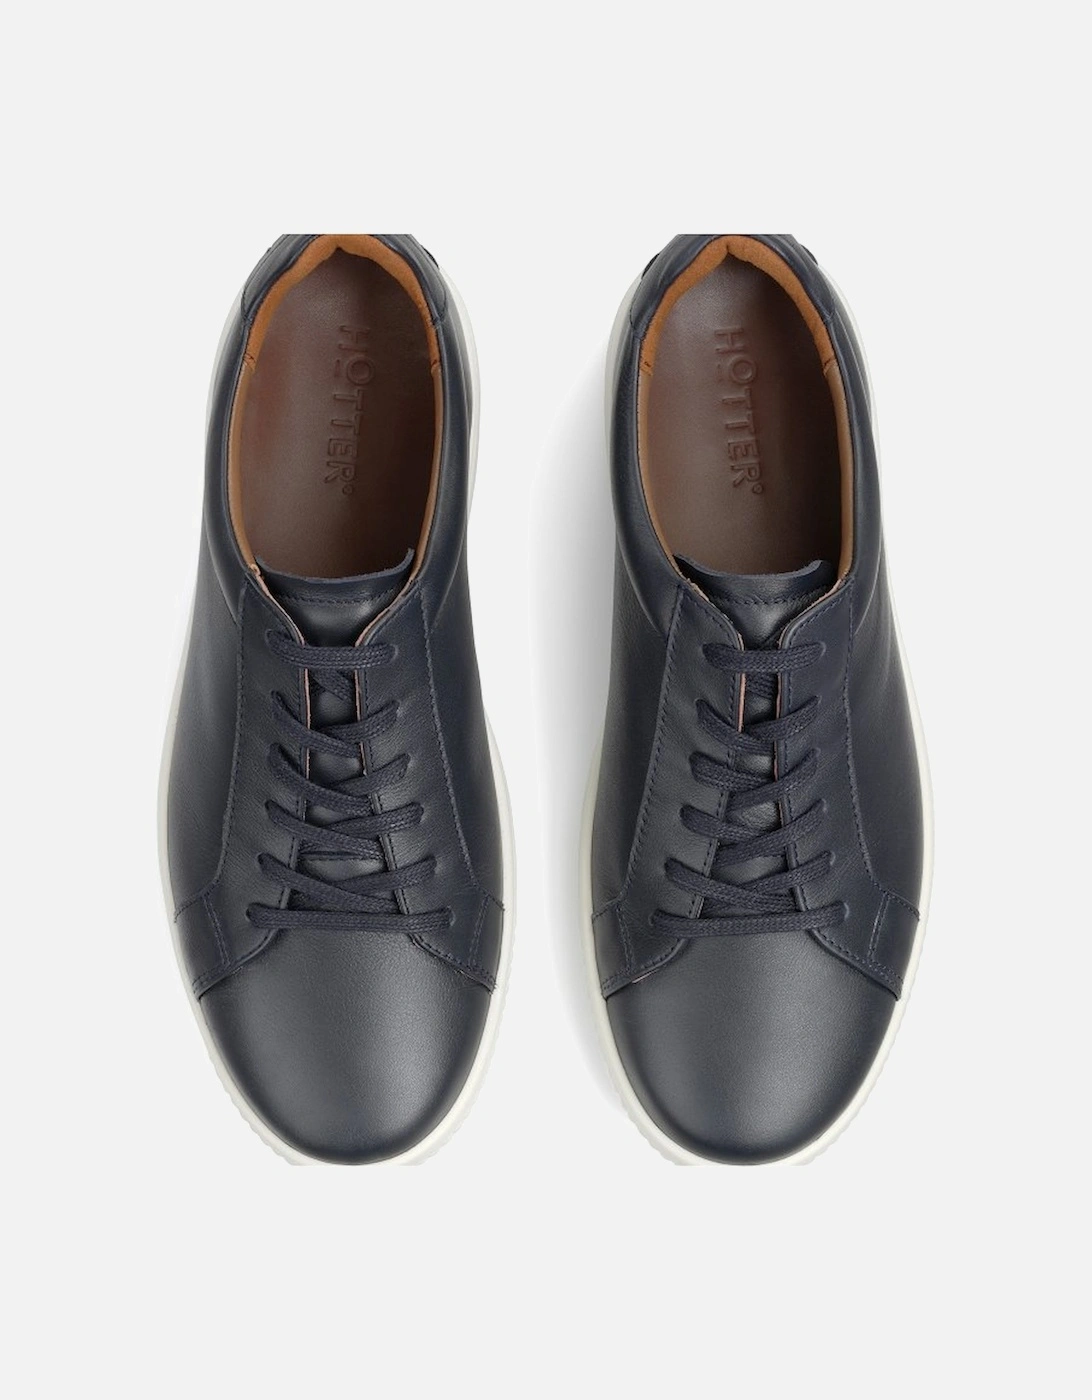 Oliver Mens Trainers